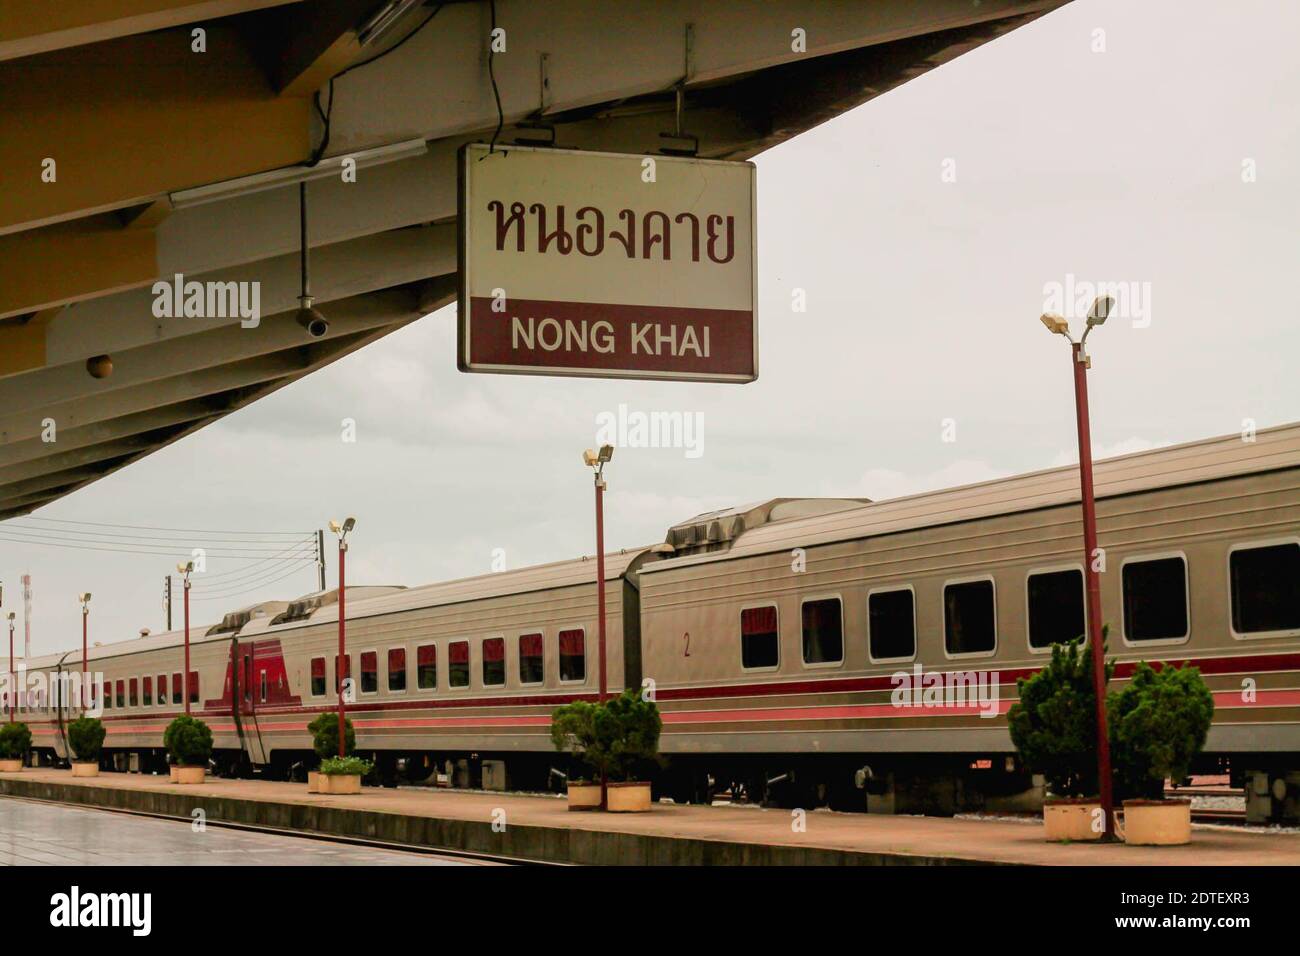 Train By Sign Hanging From Roof At Railroad Station Platform Stock Photo